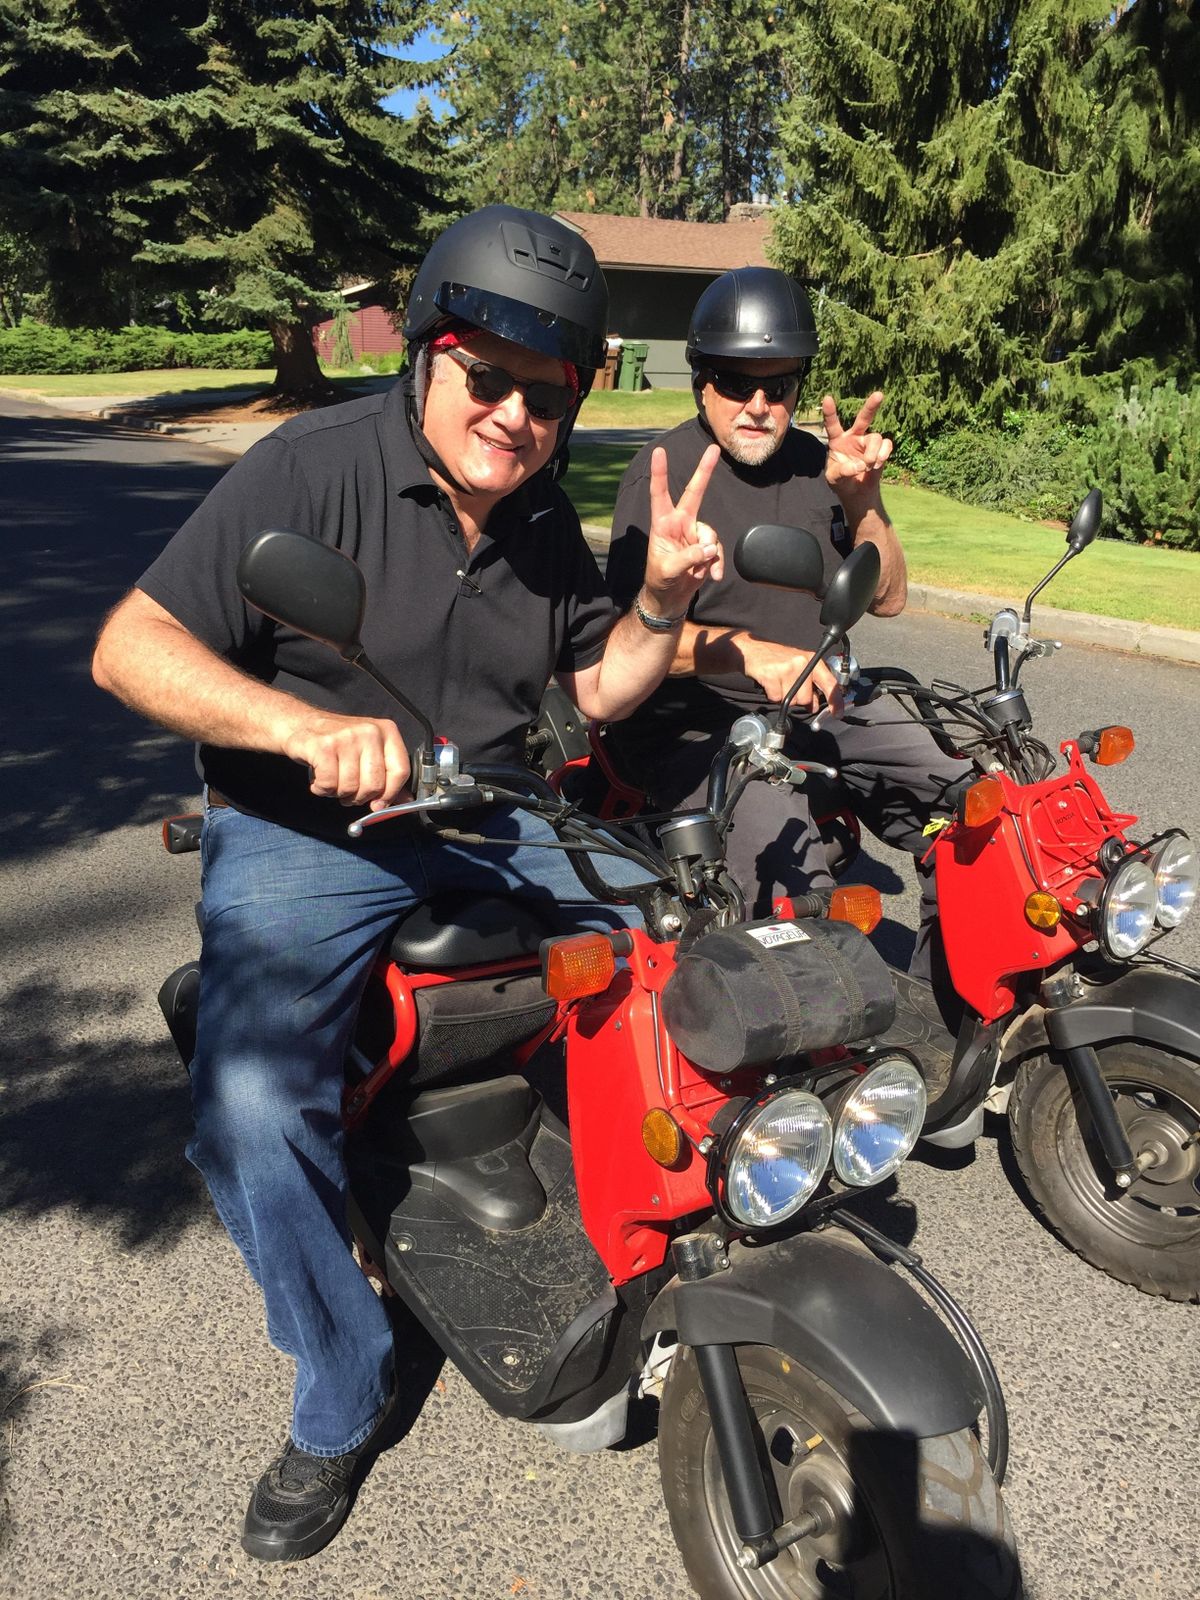 Doug Clark, left, and Scott Cooper as they saddle up for an extended trip on their Ruckus motor scooters, on July 25, 2016. (Doug Clark)